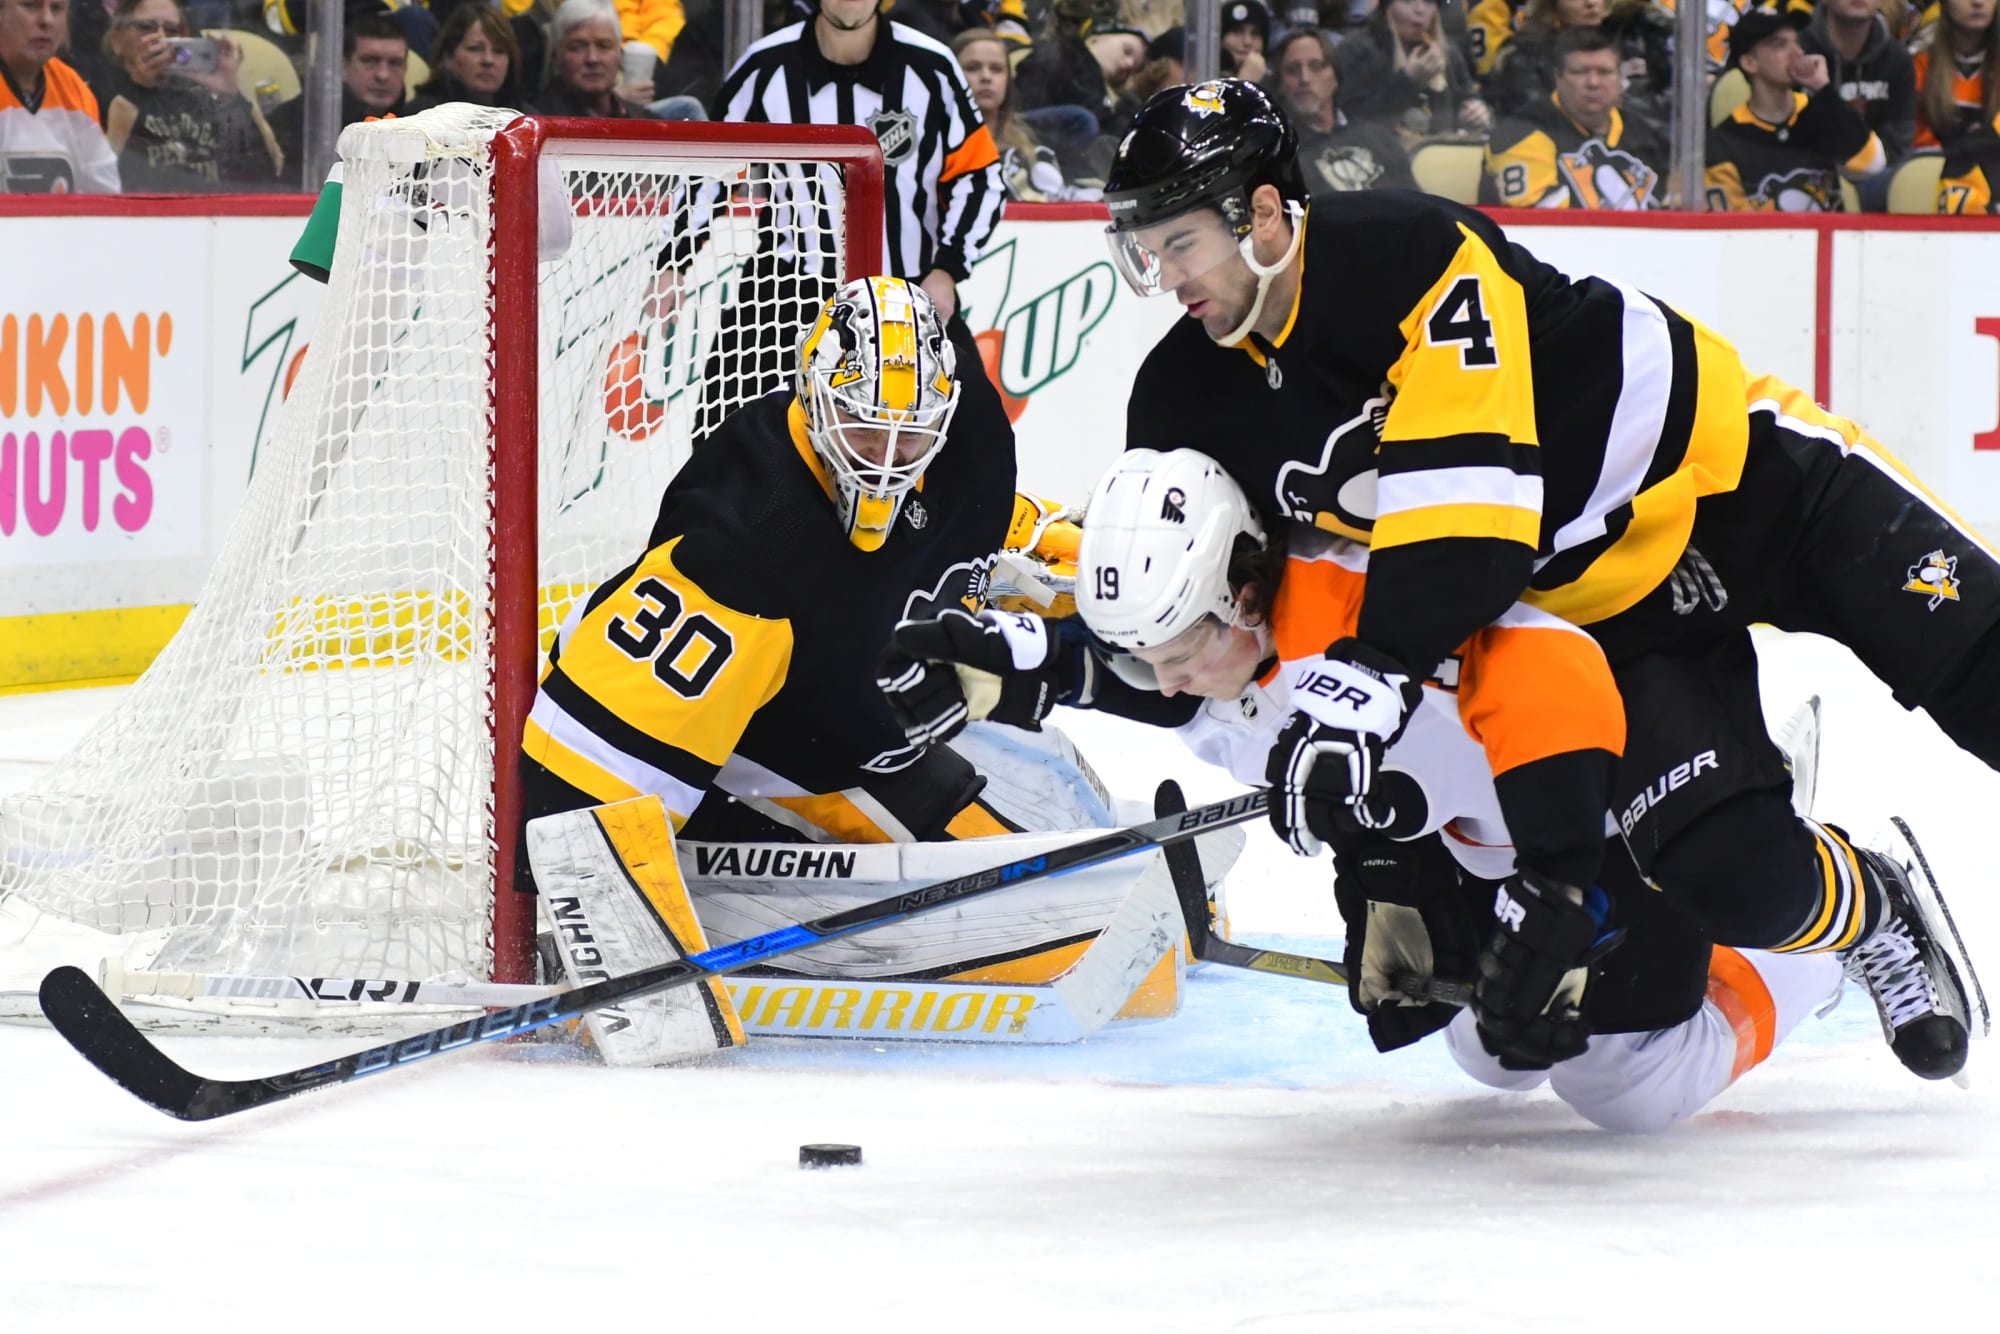 Penguins vs. Flyers live stream, Game 2 TV schedule, online and more